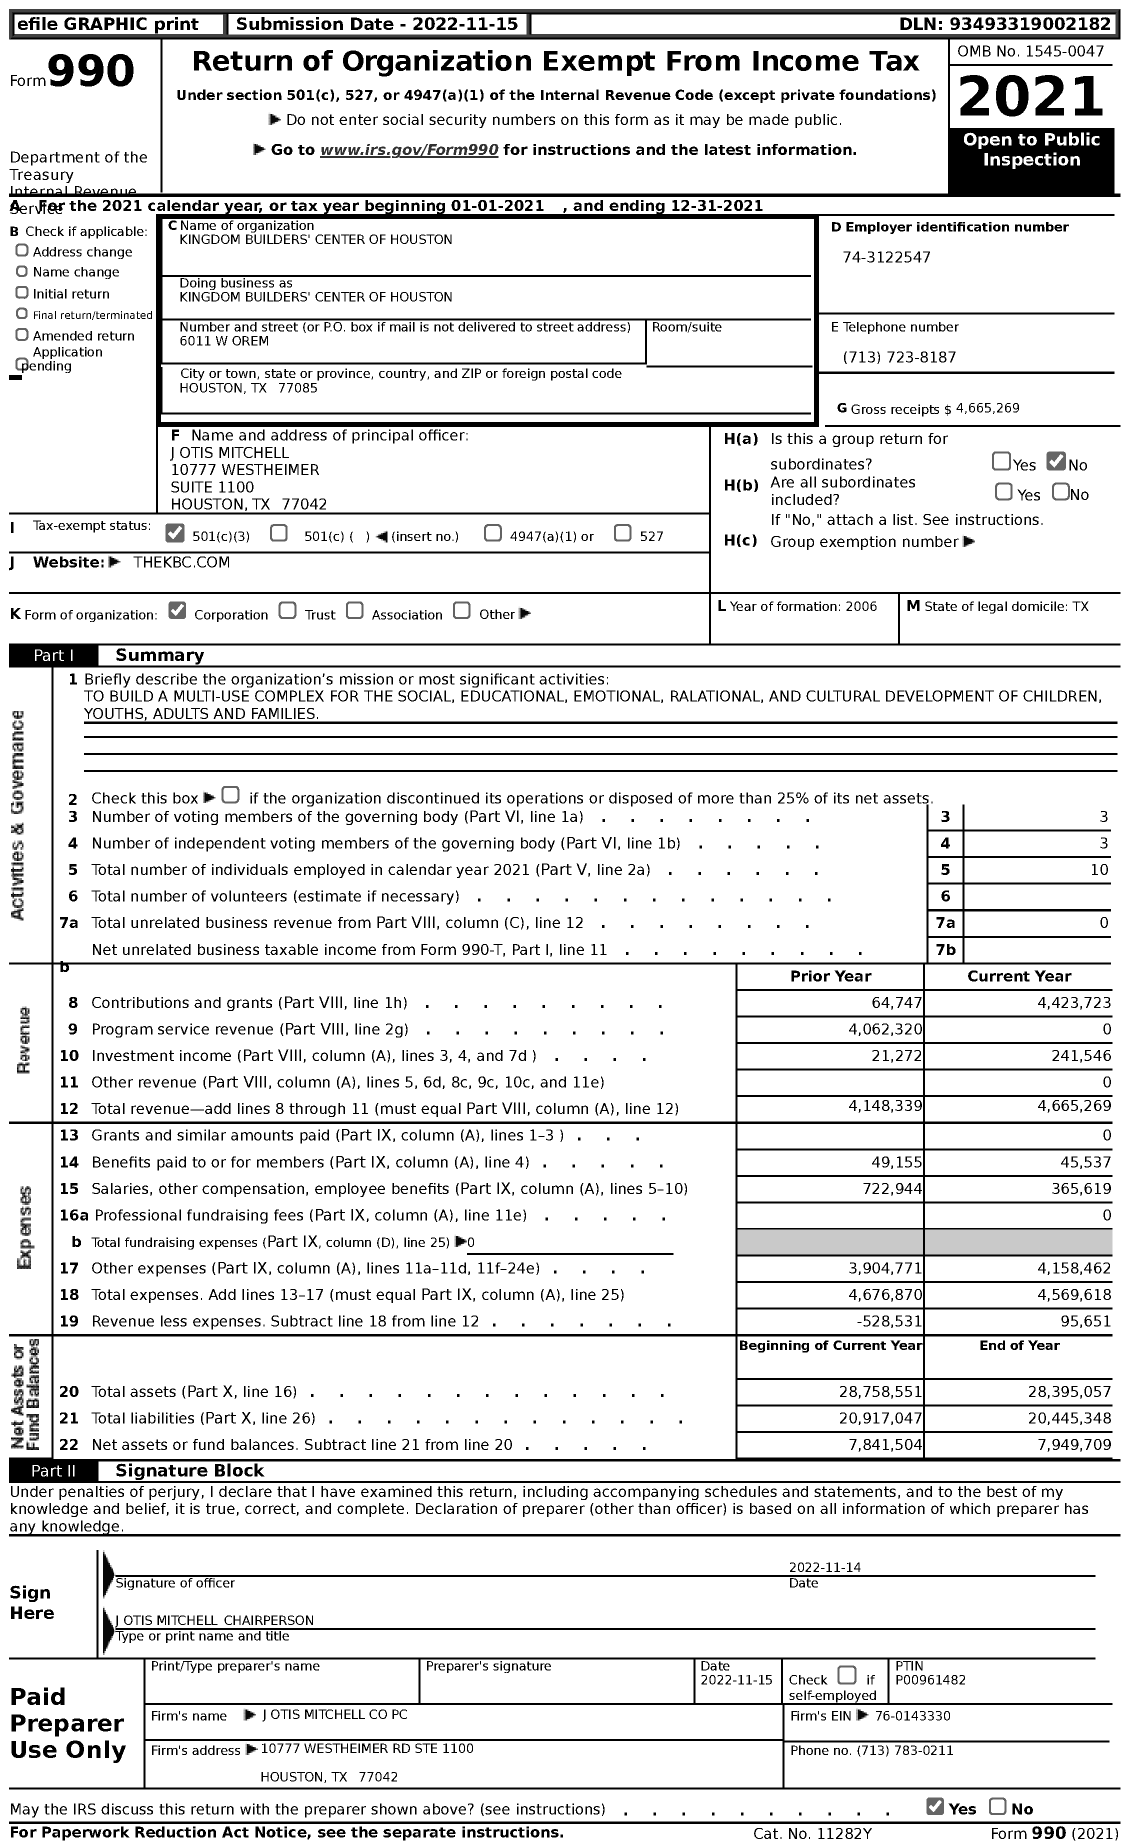 Image of first page of 2021 Form 990 for Kingdom Builders Center of Houston (KBC)